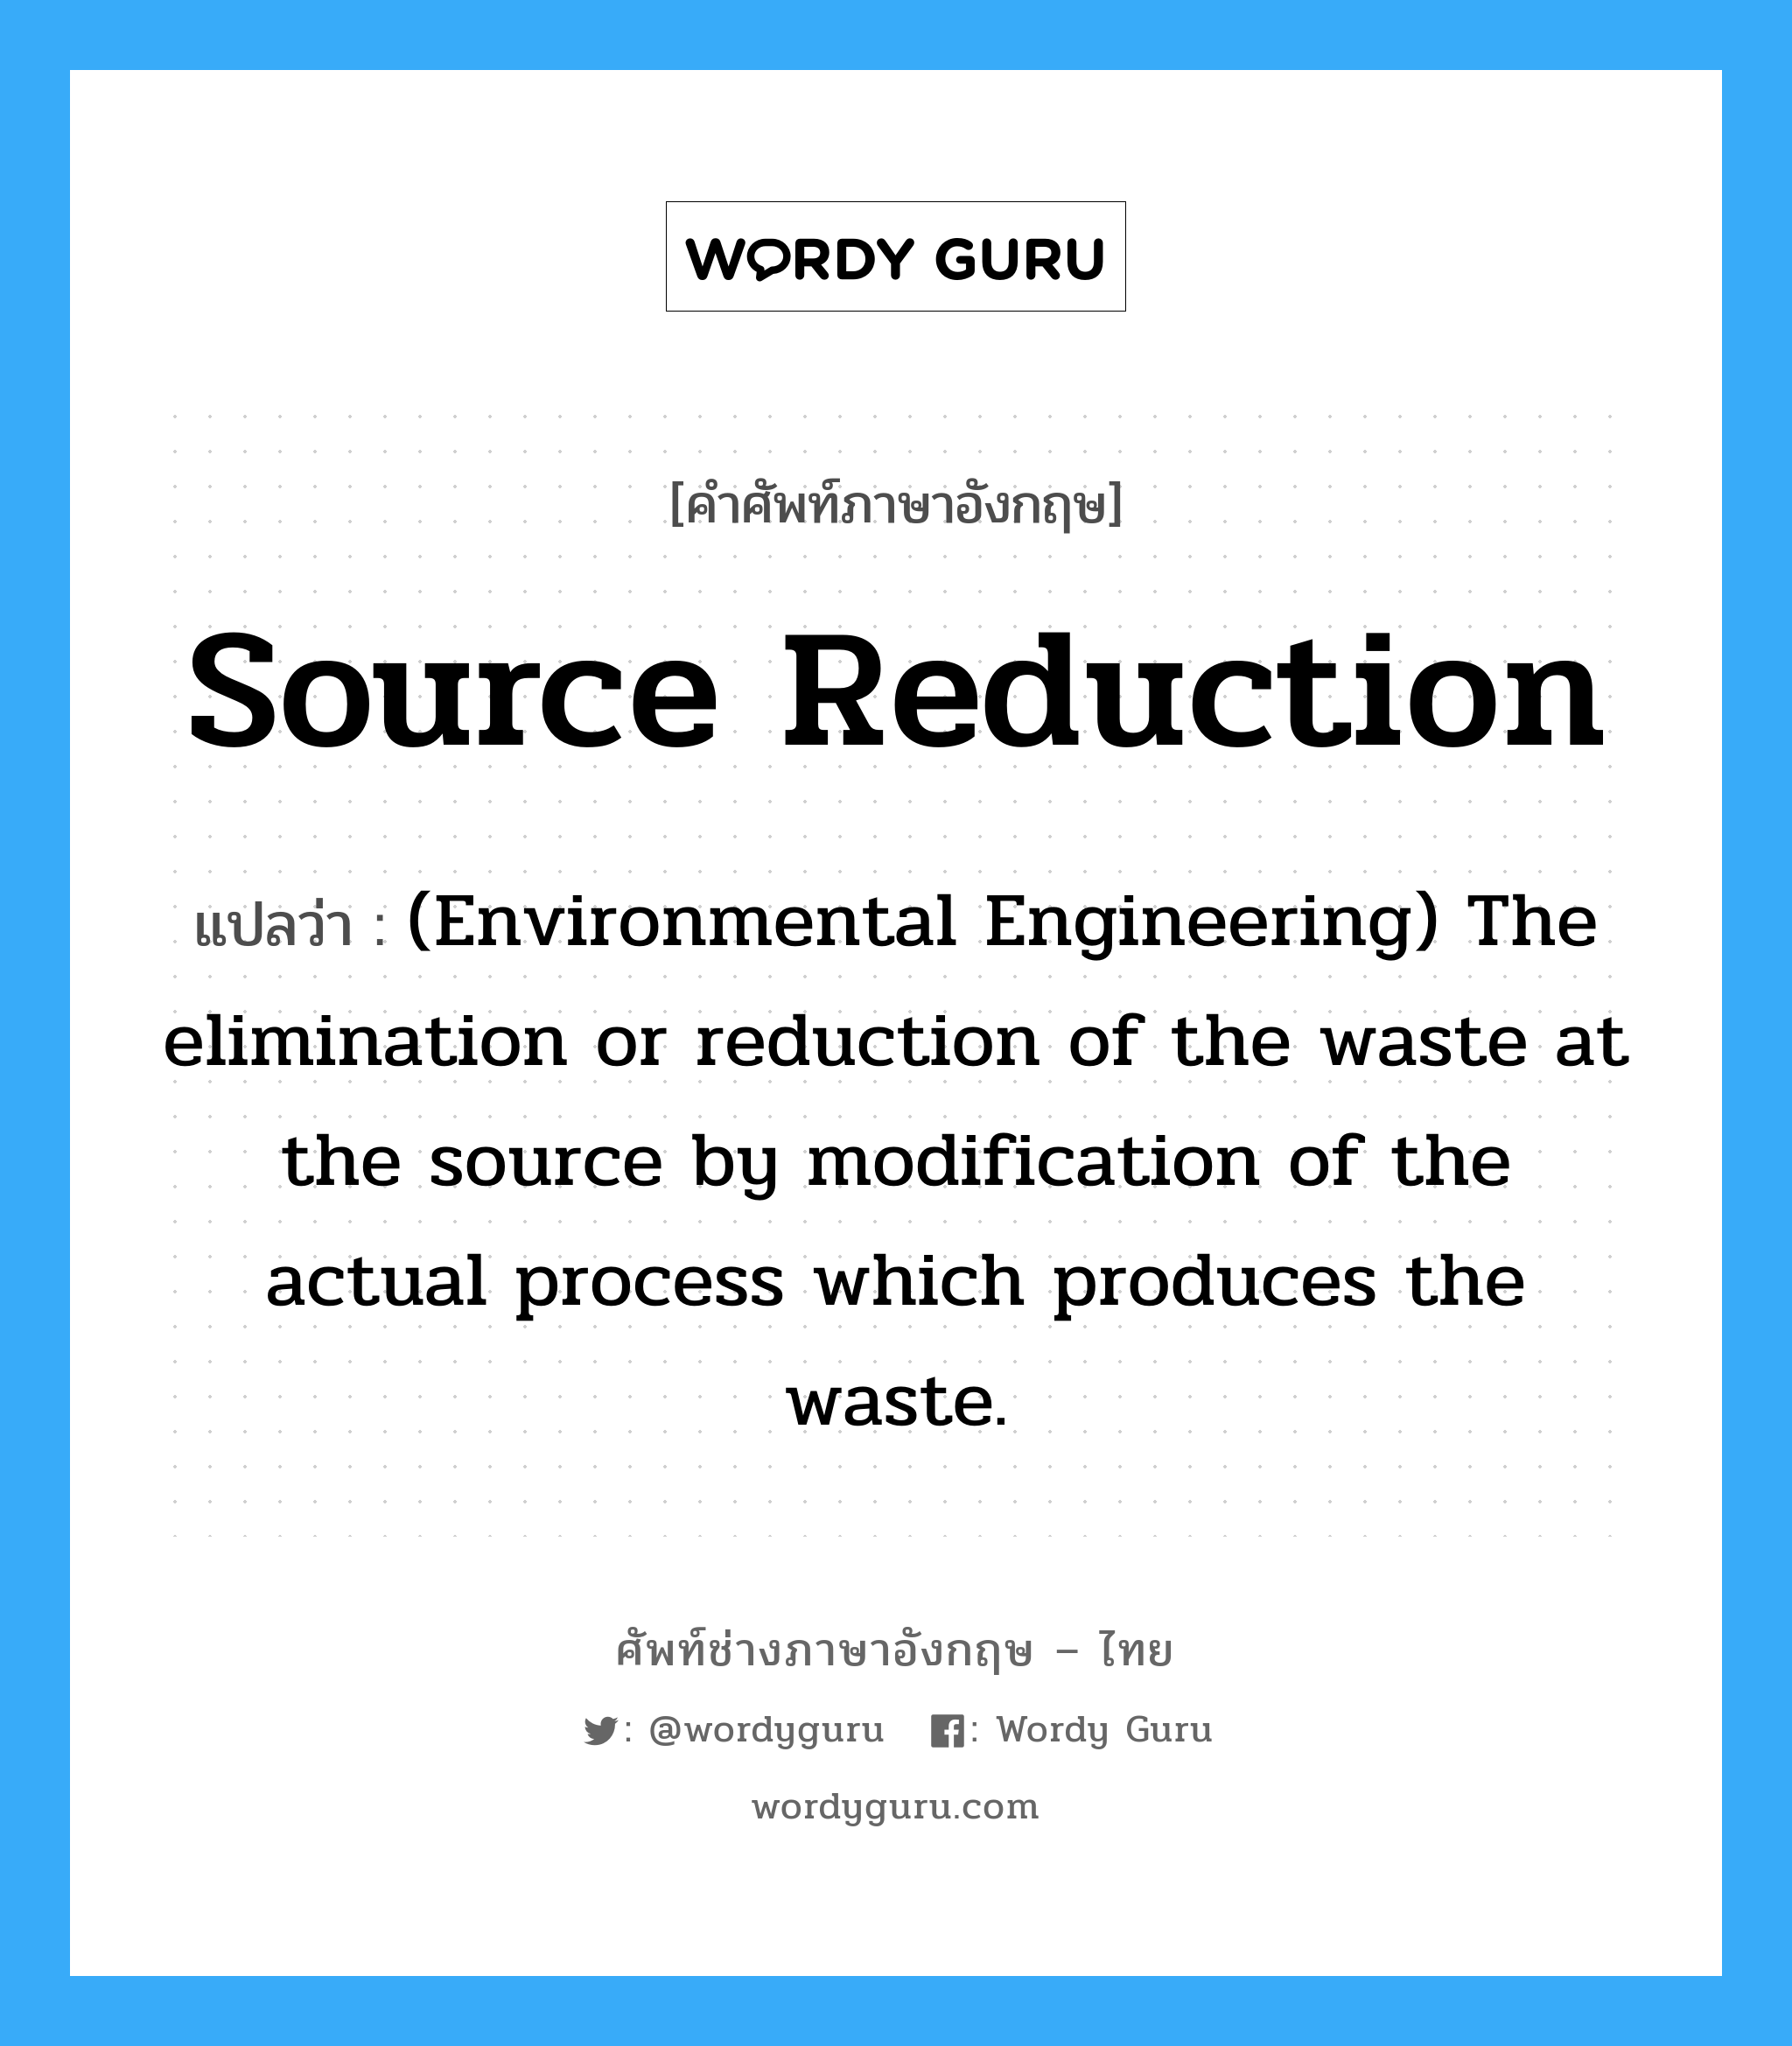 (Environmental Engineering) The elimination or reduction of a waste prior to its generation. This is accomplished by process changes rather than waste treatment methods. ภาษาอังกฤษ?, คำศัพท์ช่างภาษาอังกฤษ - ไทย (Environmental Engineering) The elimination or reduction of the waste at the source by modification of the actual process which produces the waste. คำศัพท์ภาษาอังกฤษ (Environmental Engineering) The elimination or reduction of the waste at the source by modification of the actual process which produces the waste. แปลว่า Source reduction